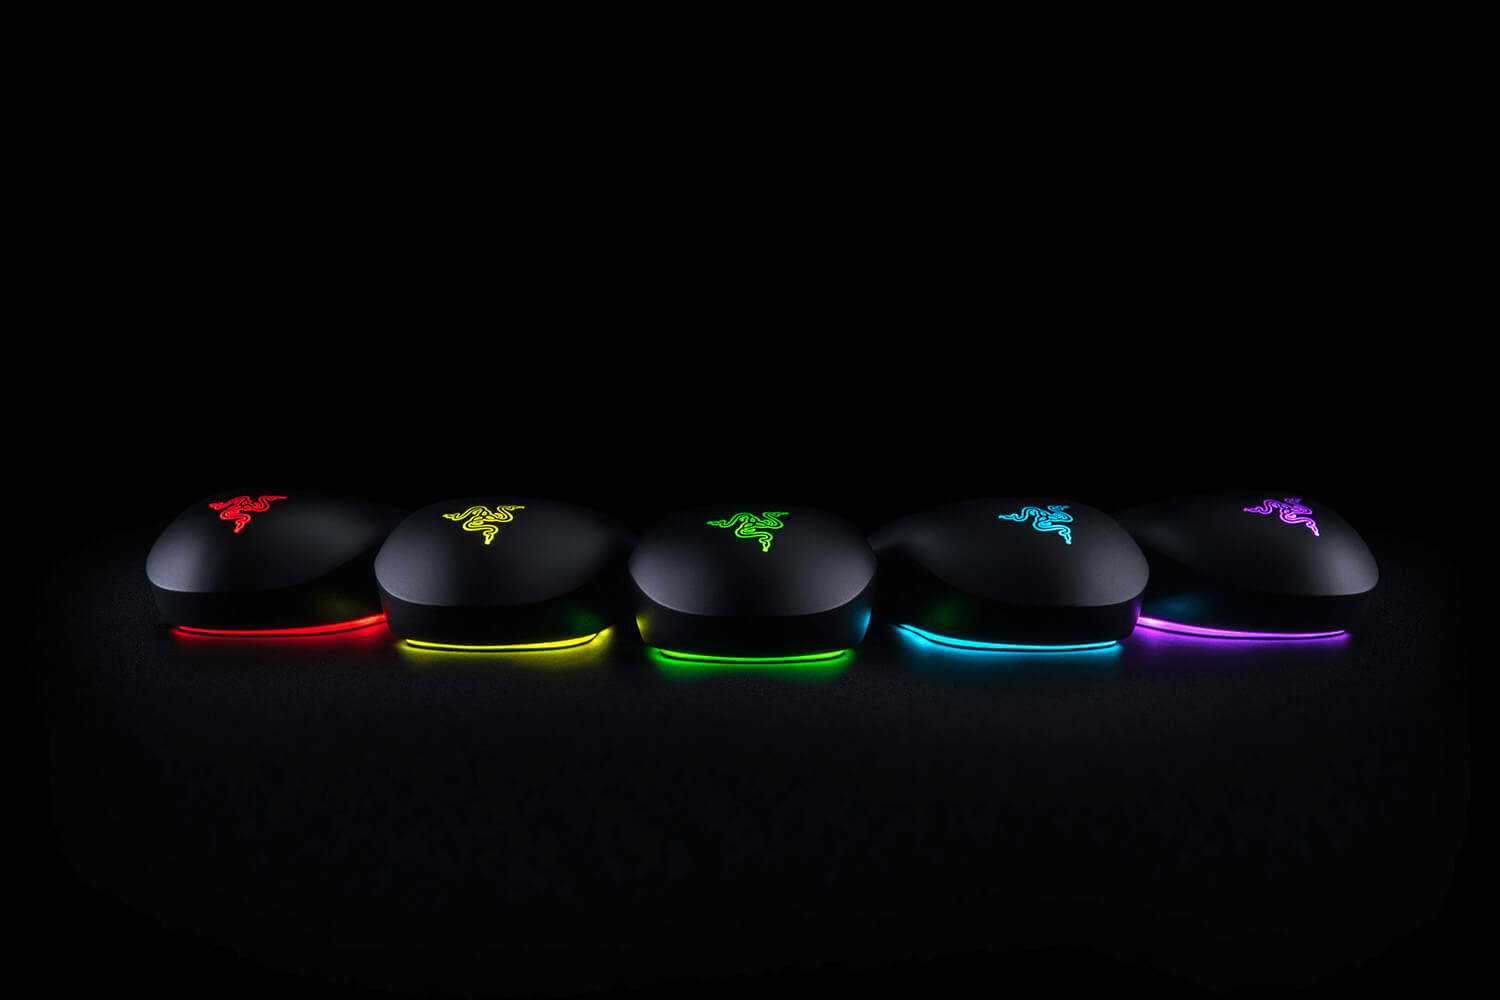 Razer launched Abyssus Essential, an entry level glowing gaming mouse